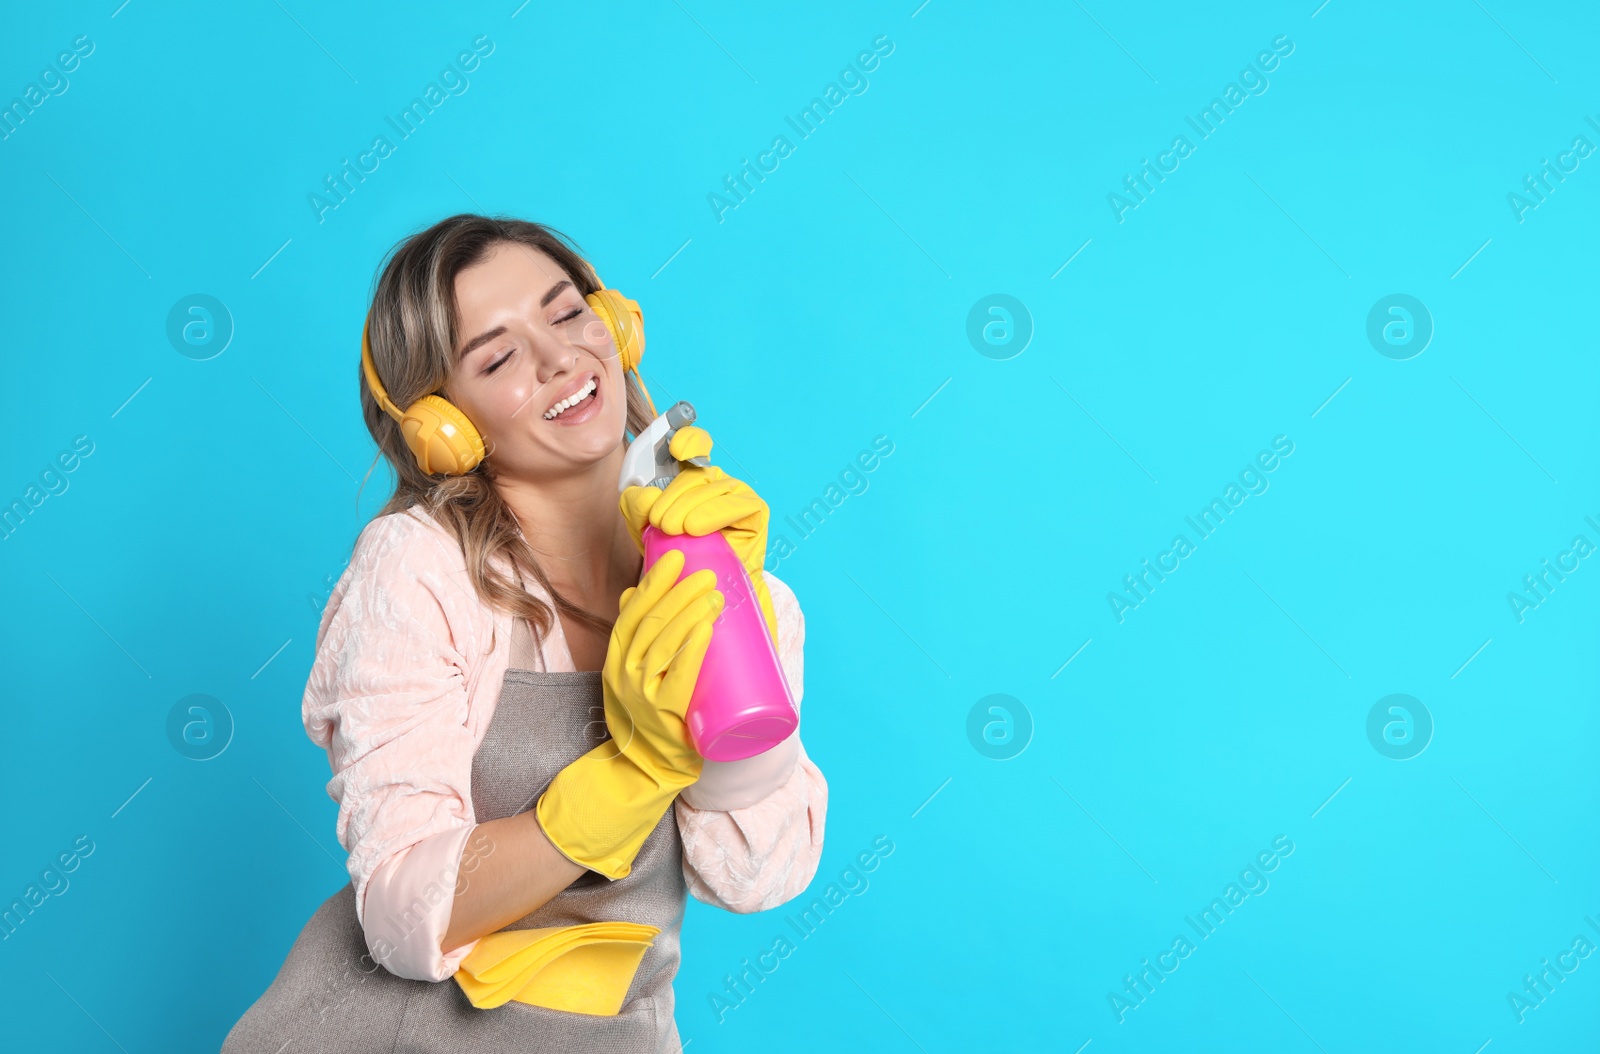 Photo of Beautiful young woman with headphones and bottle of detergent singing on light blue background. Space for text